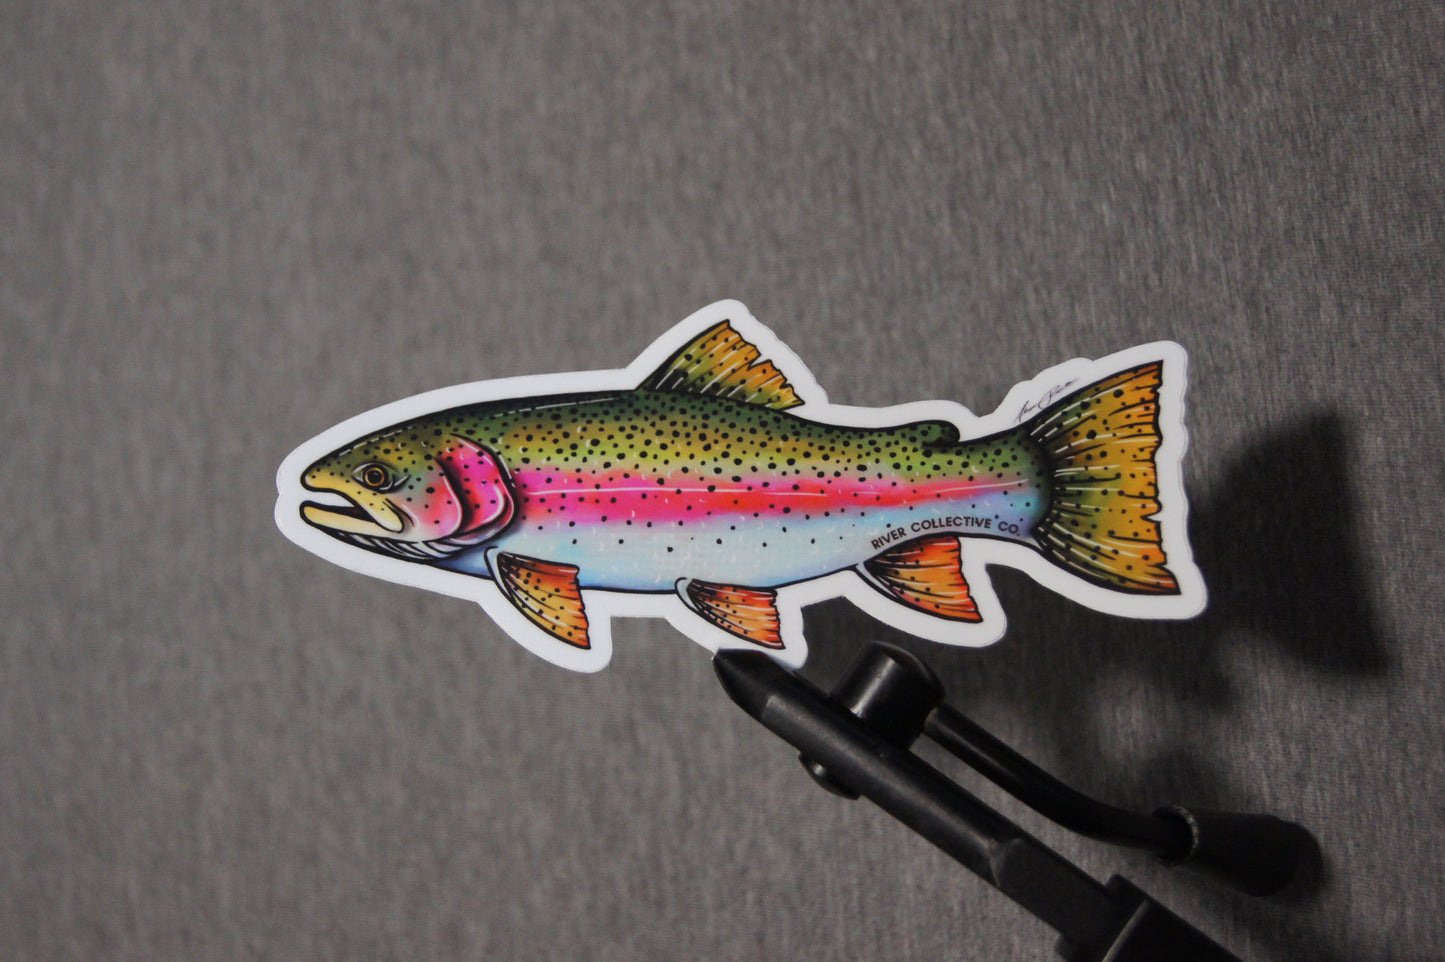 Rainbow Trout Fly Fishing 4x4 Chevy Silverado Truck Decals